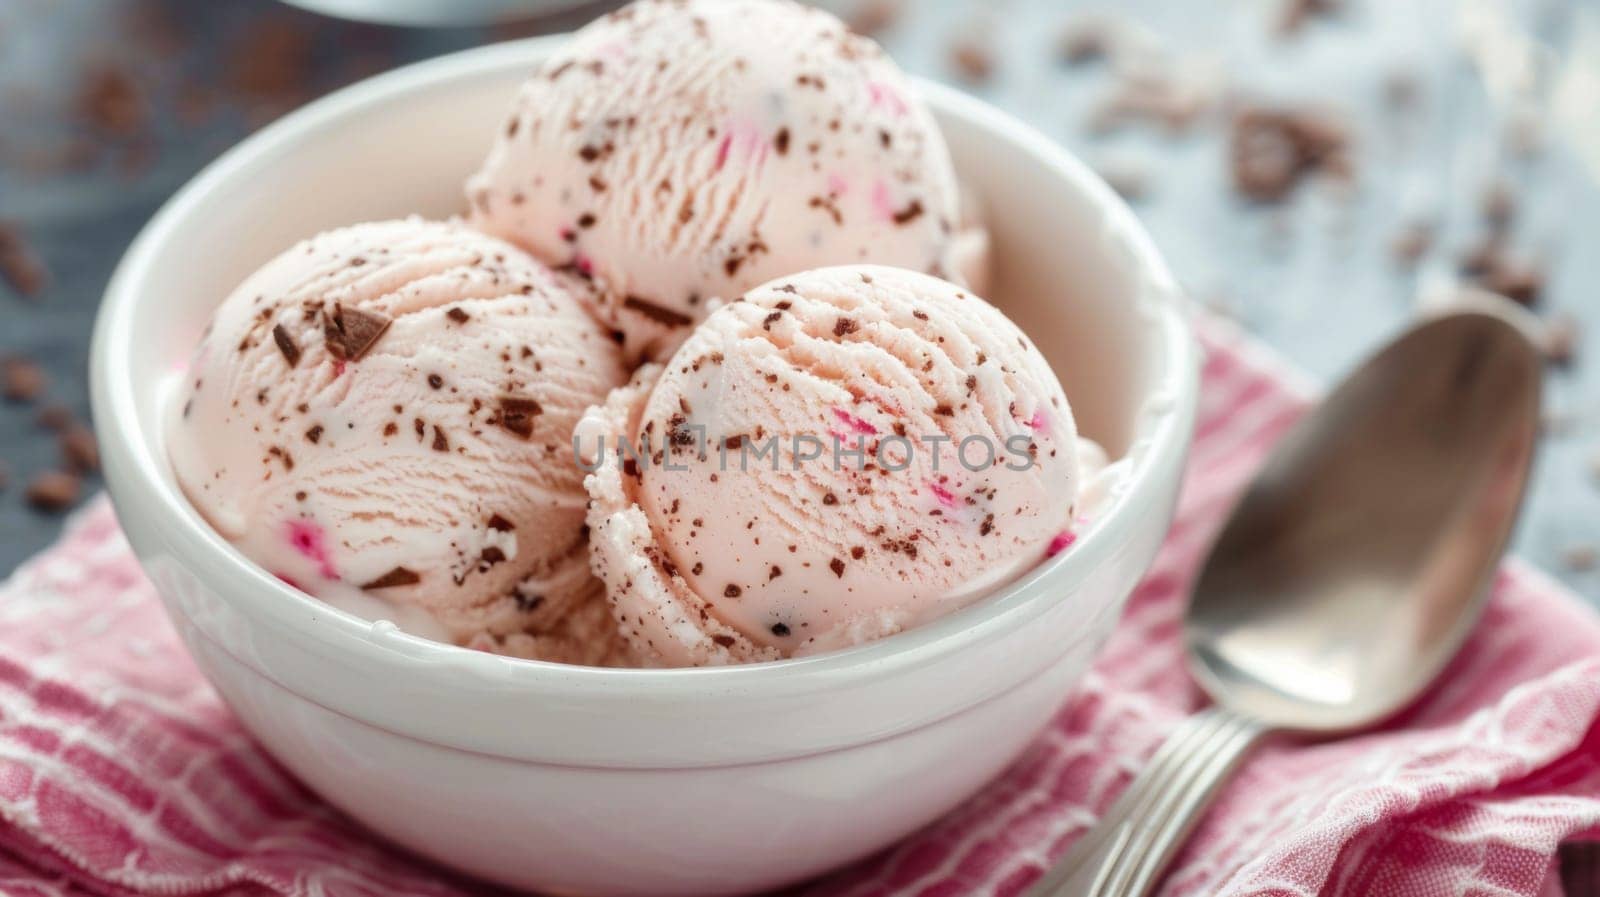 A bowl of ice cream with chocolate chips and sprinkles, AI by starush